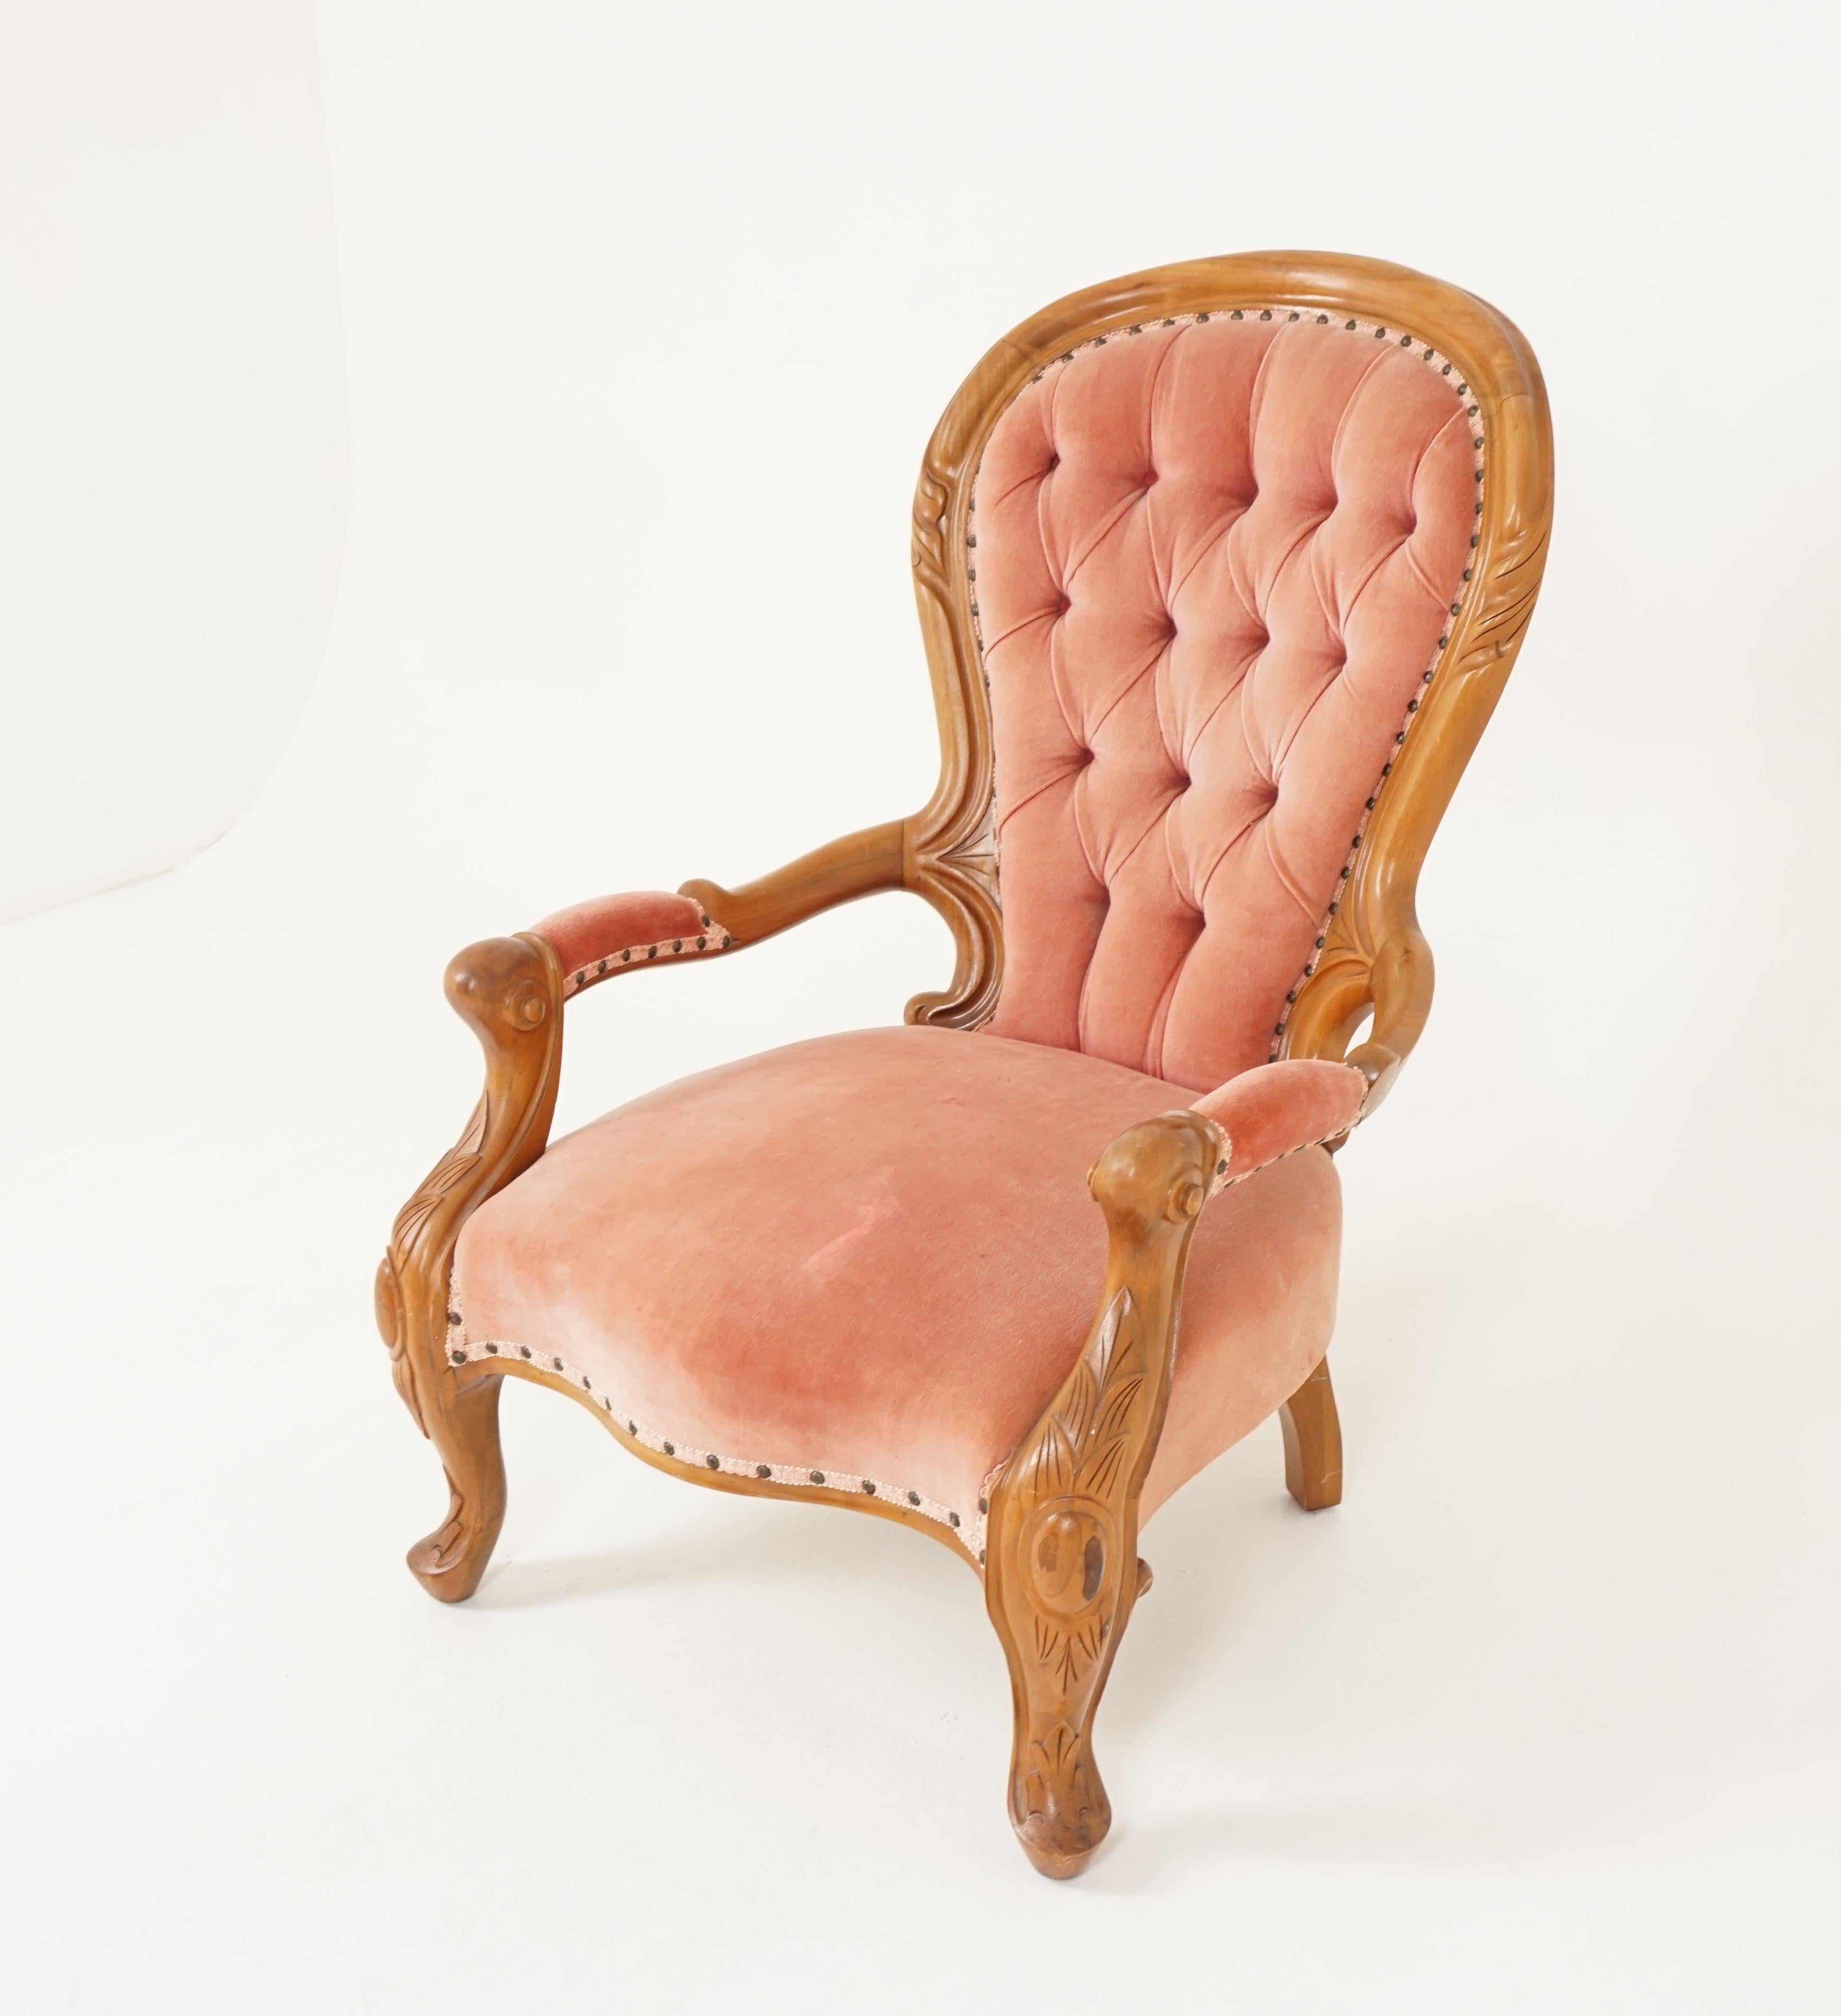 Antique Victorian arm chair, carved Walnut, button back, Scotland 1870, B2504

Scotland, 1870
Solid Walnut
Original finish
Carved detail to the upholstered button back
Large upholstered seat
The arm supports finishes in a scroll in front of the arm